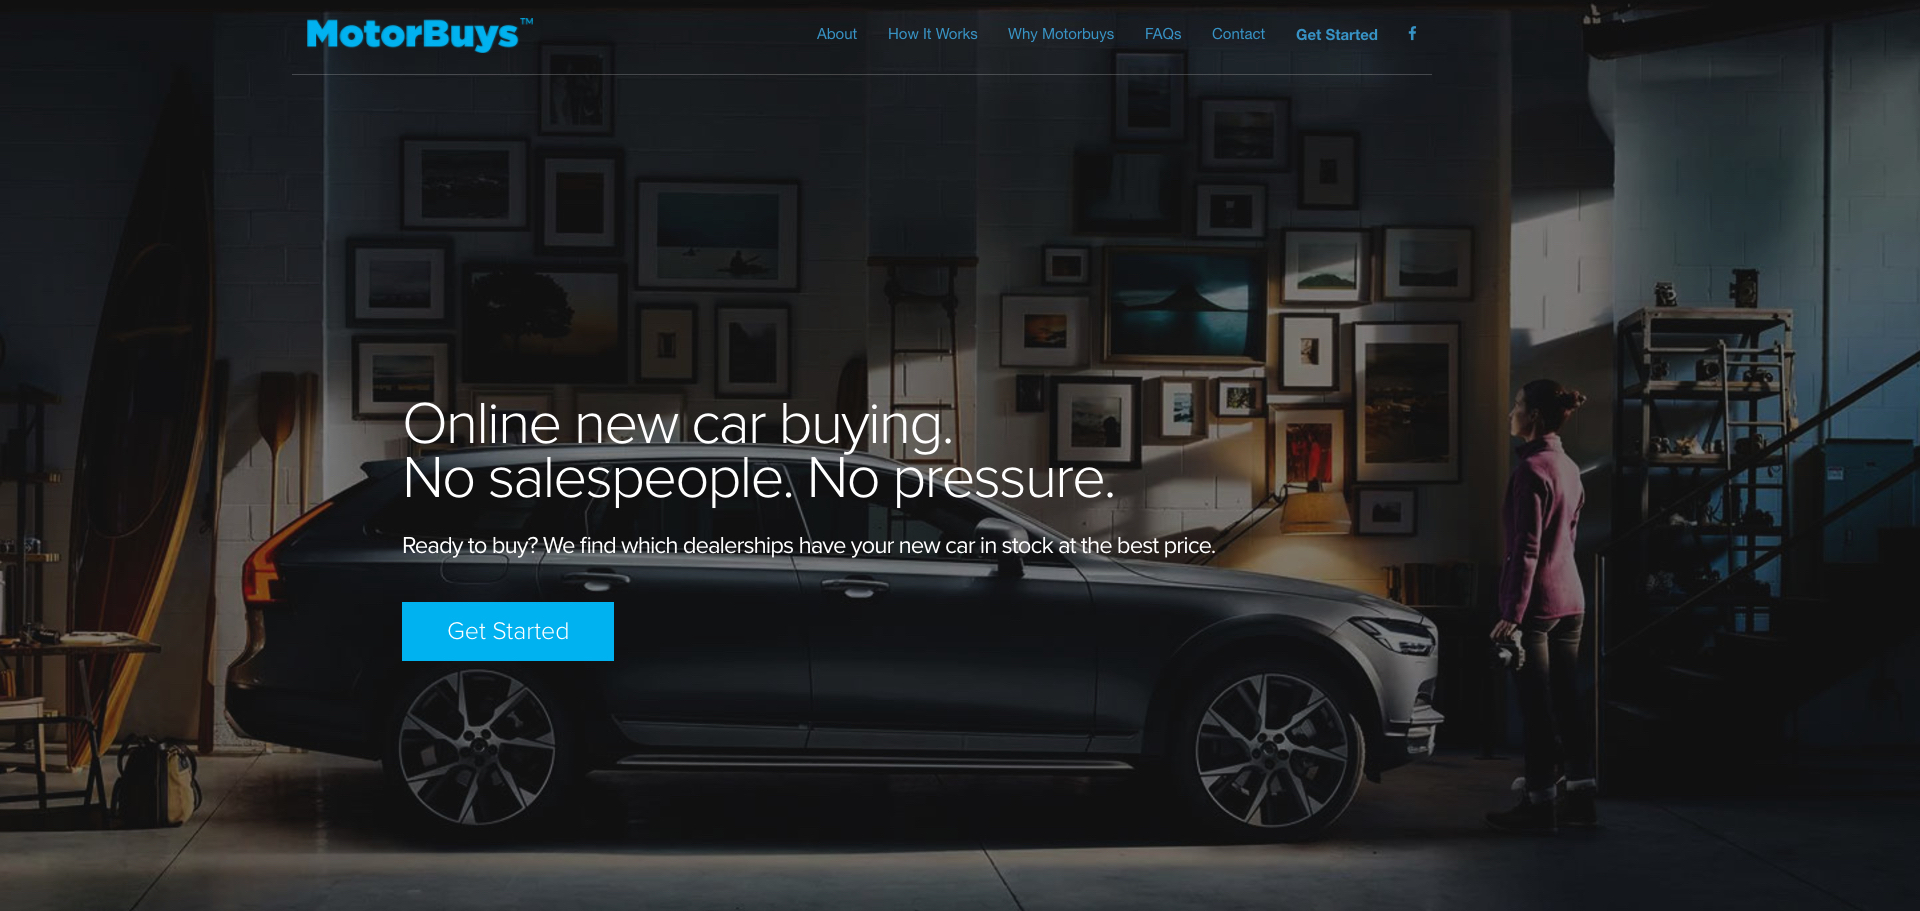 Motorbuys automated online new car buying